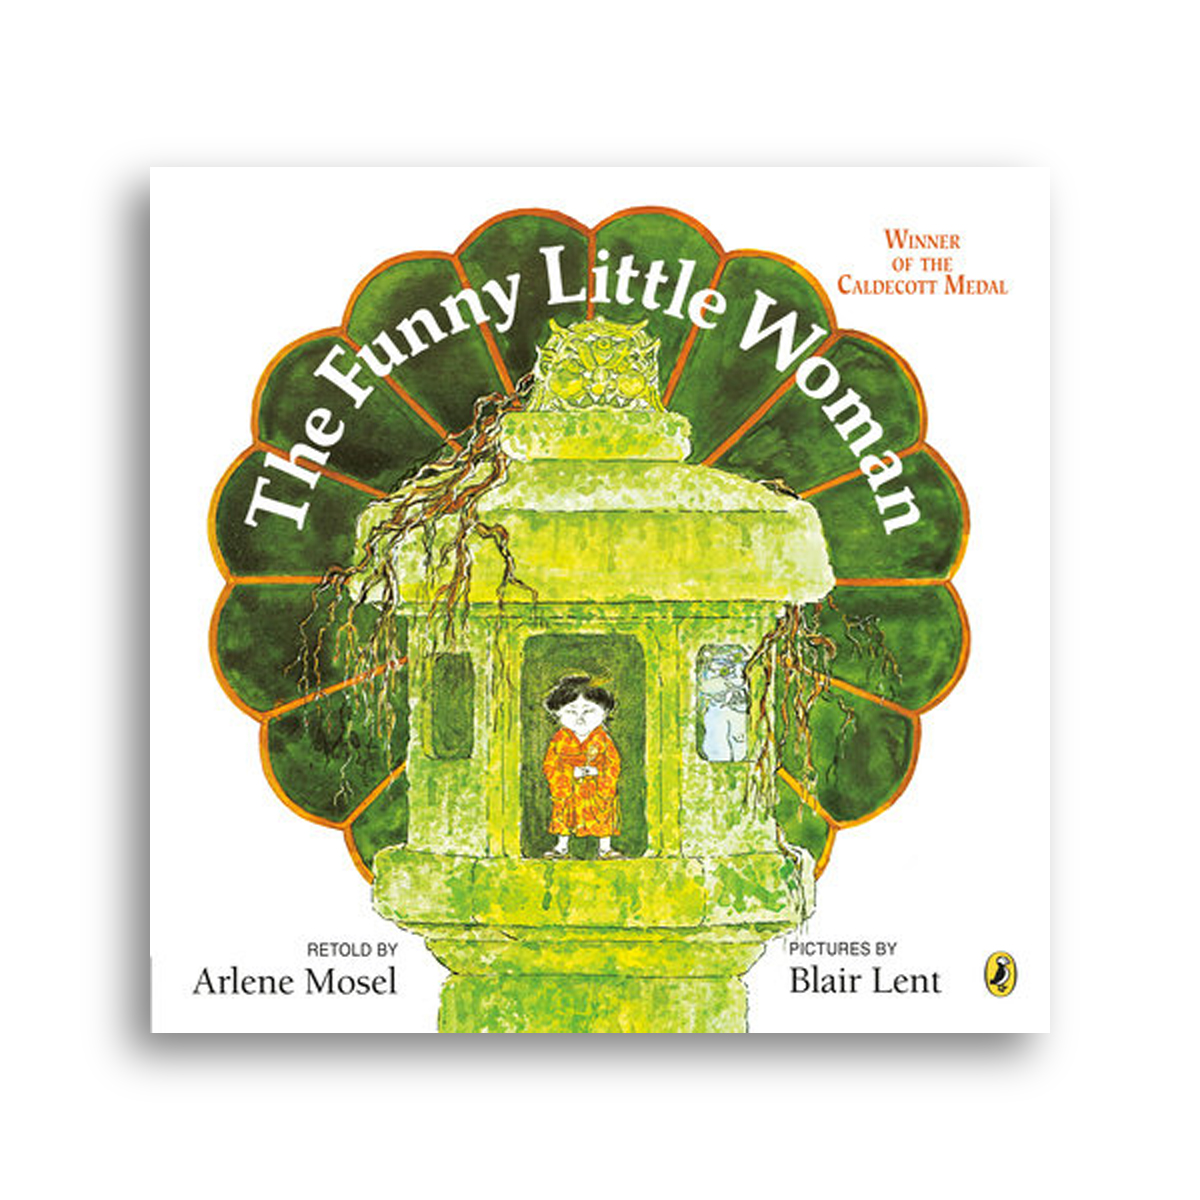 Front cover design for The Funny Little Woman, Retold by Arlene Mosel and Pictures by Blair Lent, a Caldecott Medal-winning picture book. Woman standing in the doorway of a small structure with overgrown roots on the roof and a monster hiding in the structure.